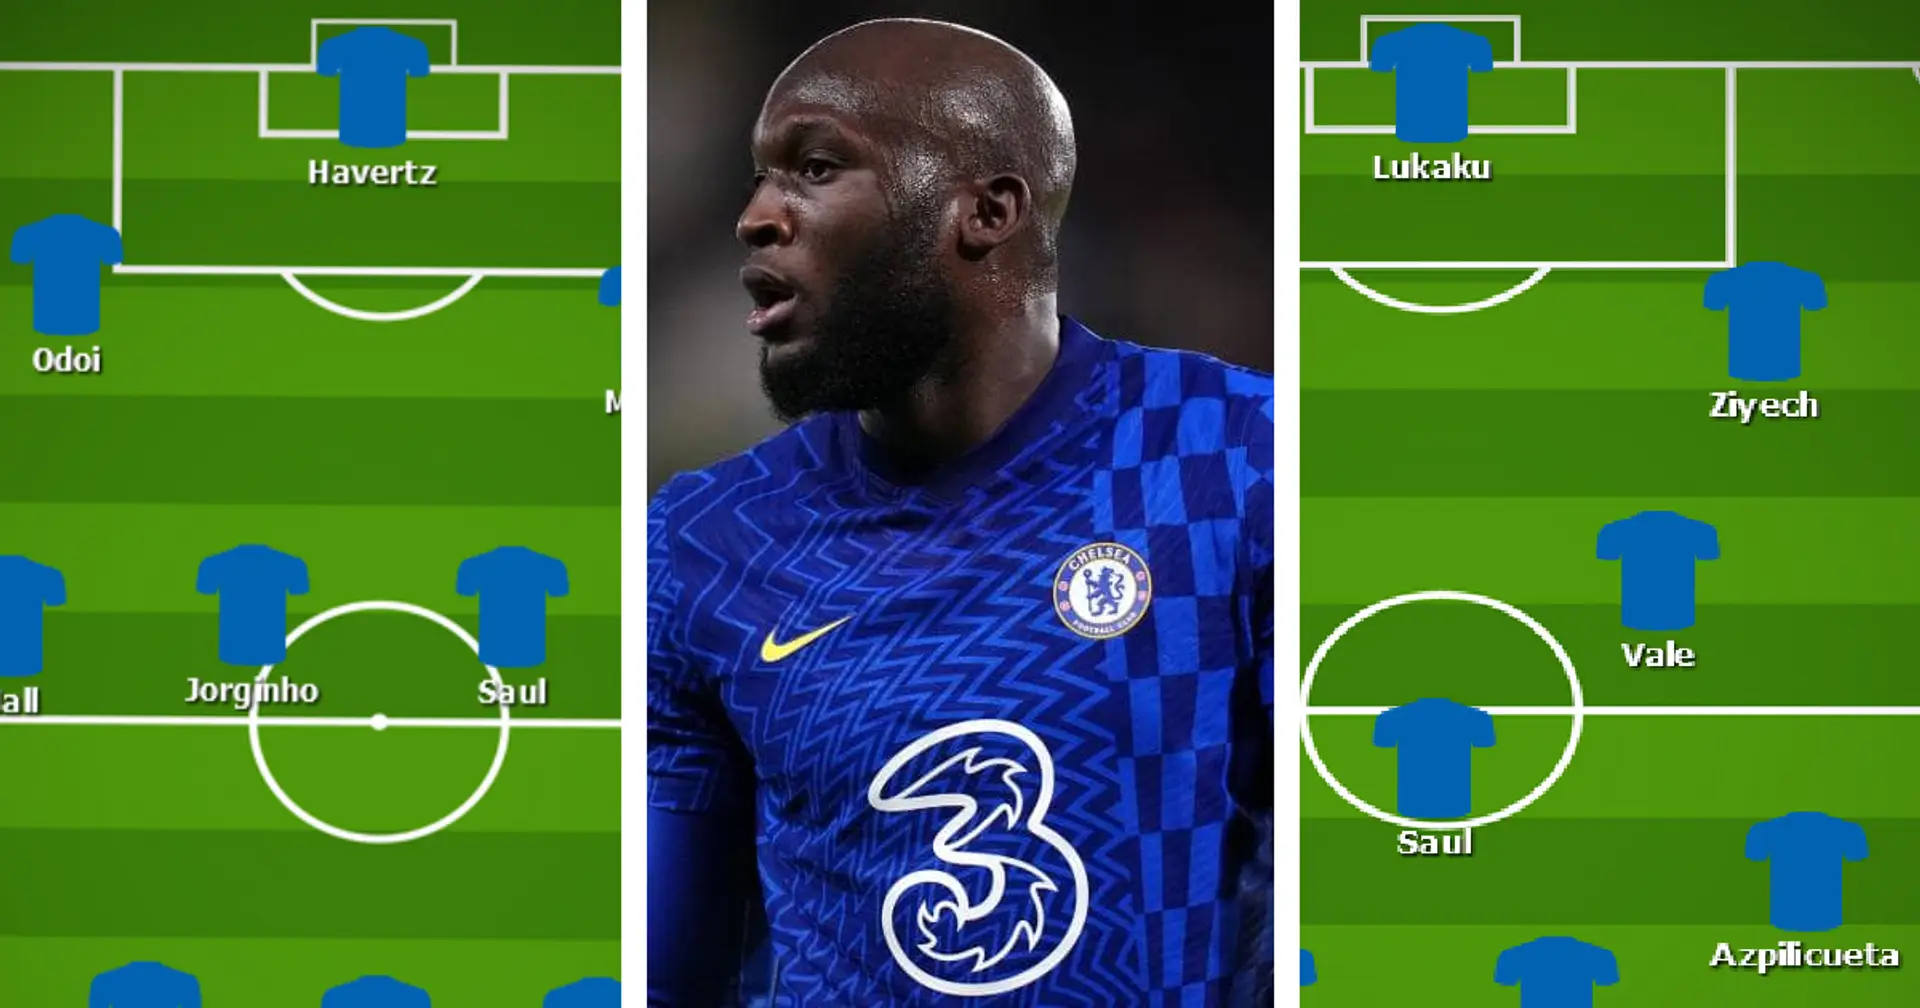 Vale to start? select Chelsea's best XI for Plymouth clash from 3 options